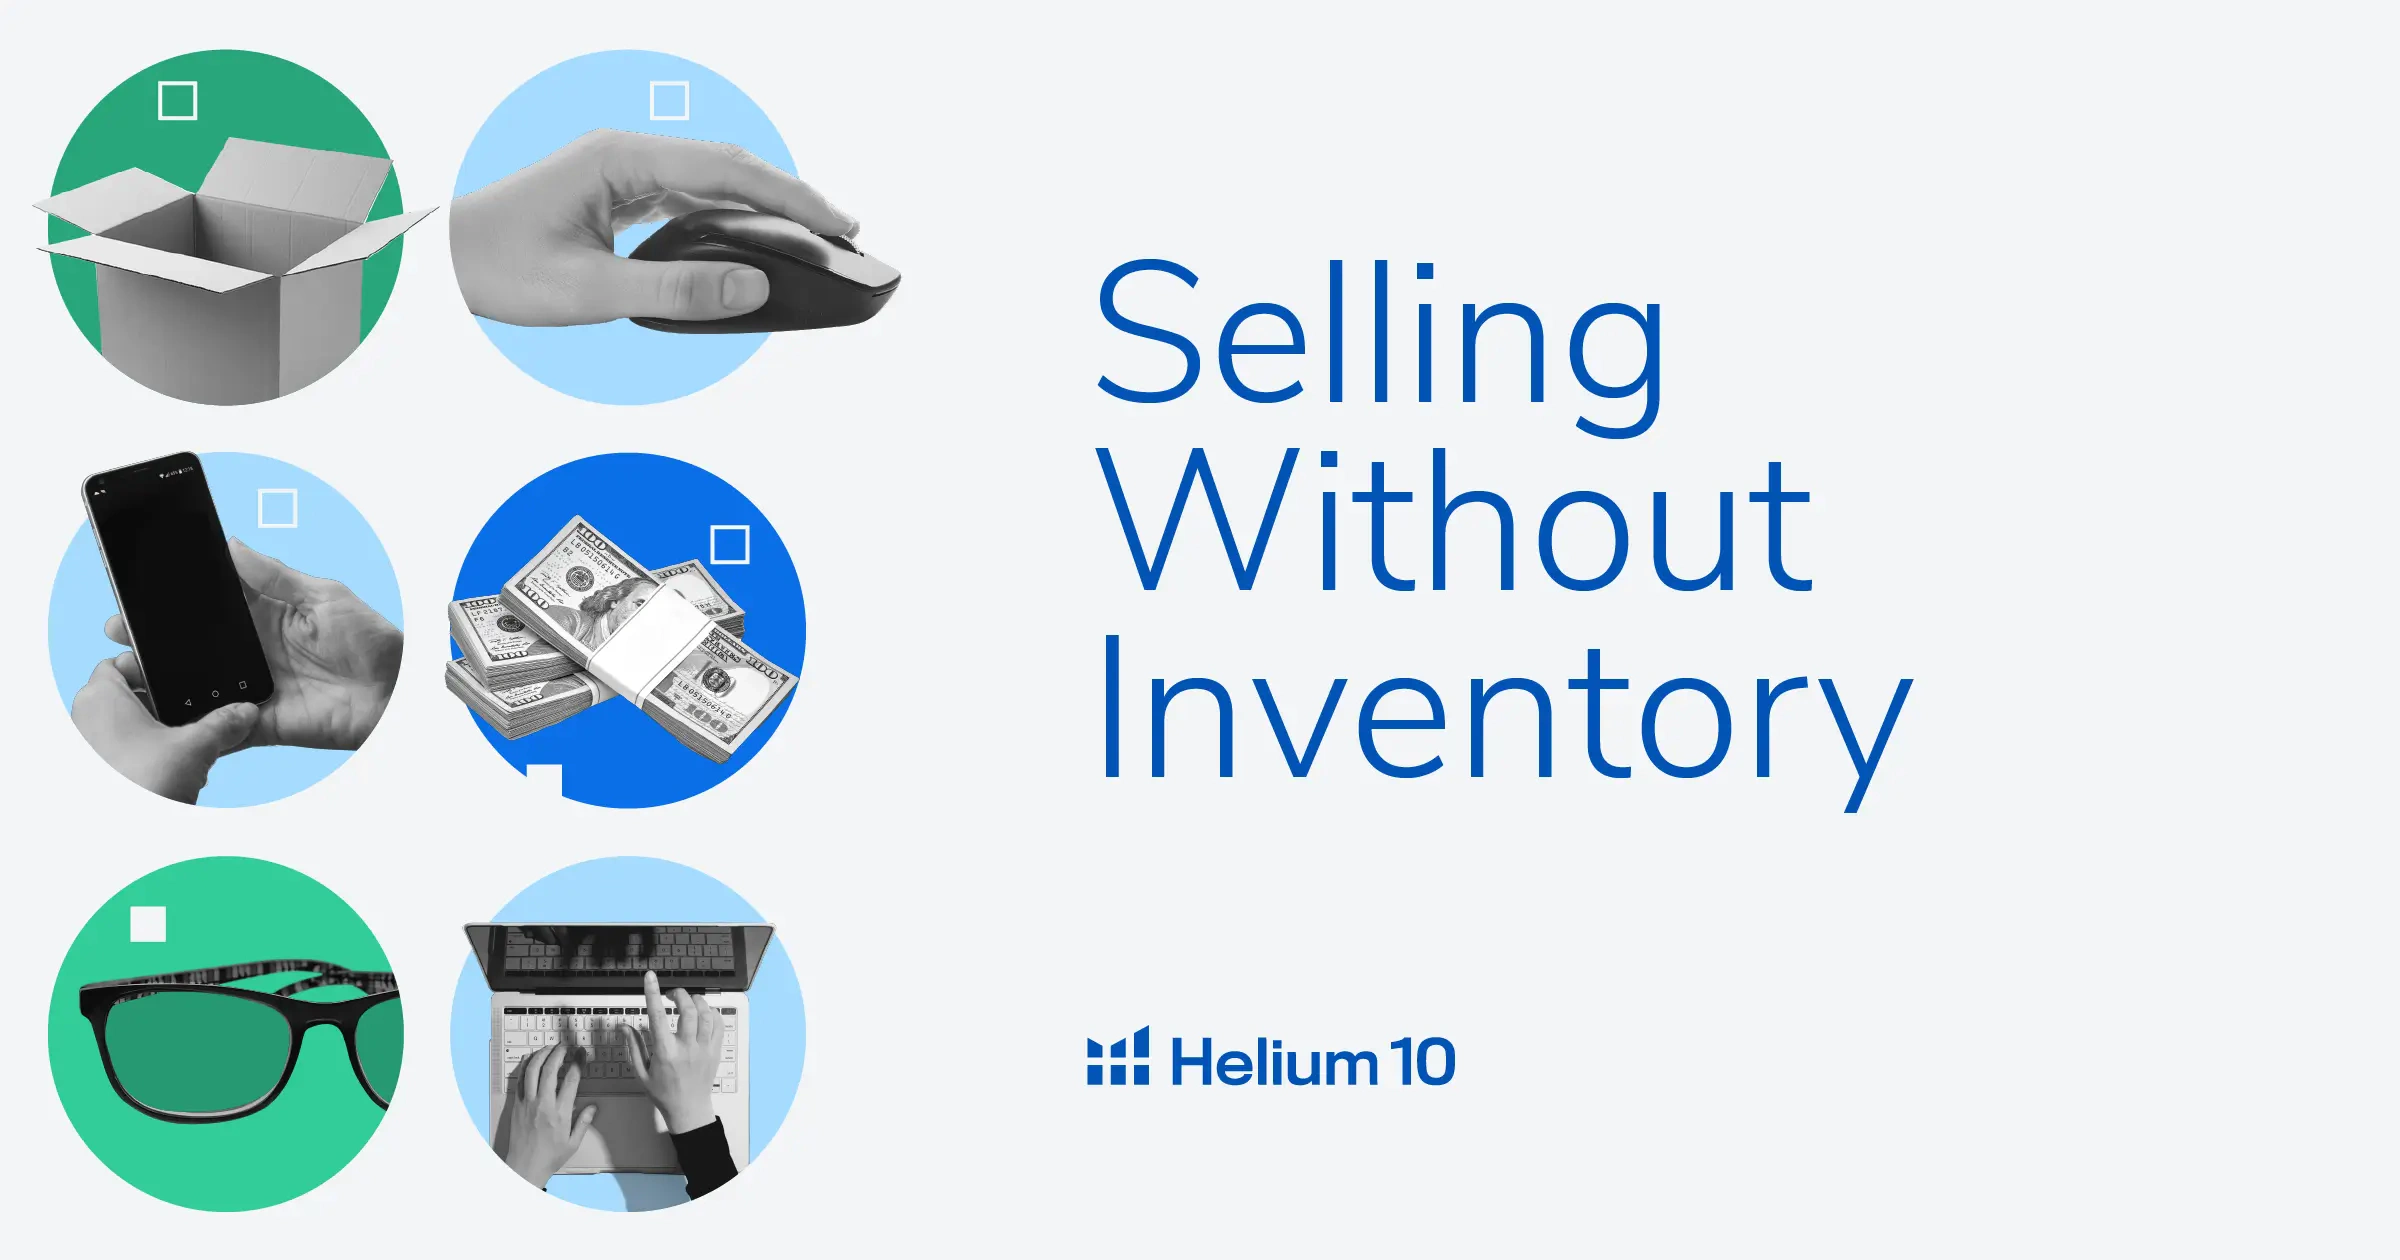 https://www.helium10.com/app/uploads/2022/09/Q4_Blog-Banner_How-to-Sell-on-Amazon-without-Inventory.webp